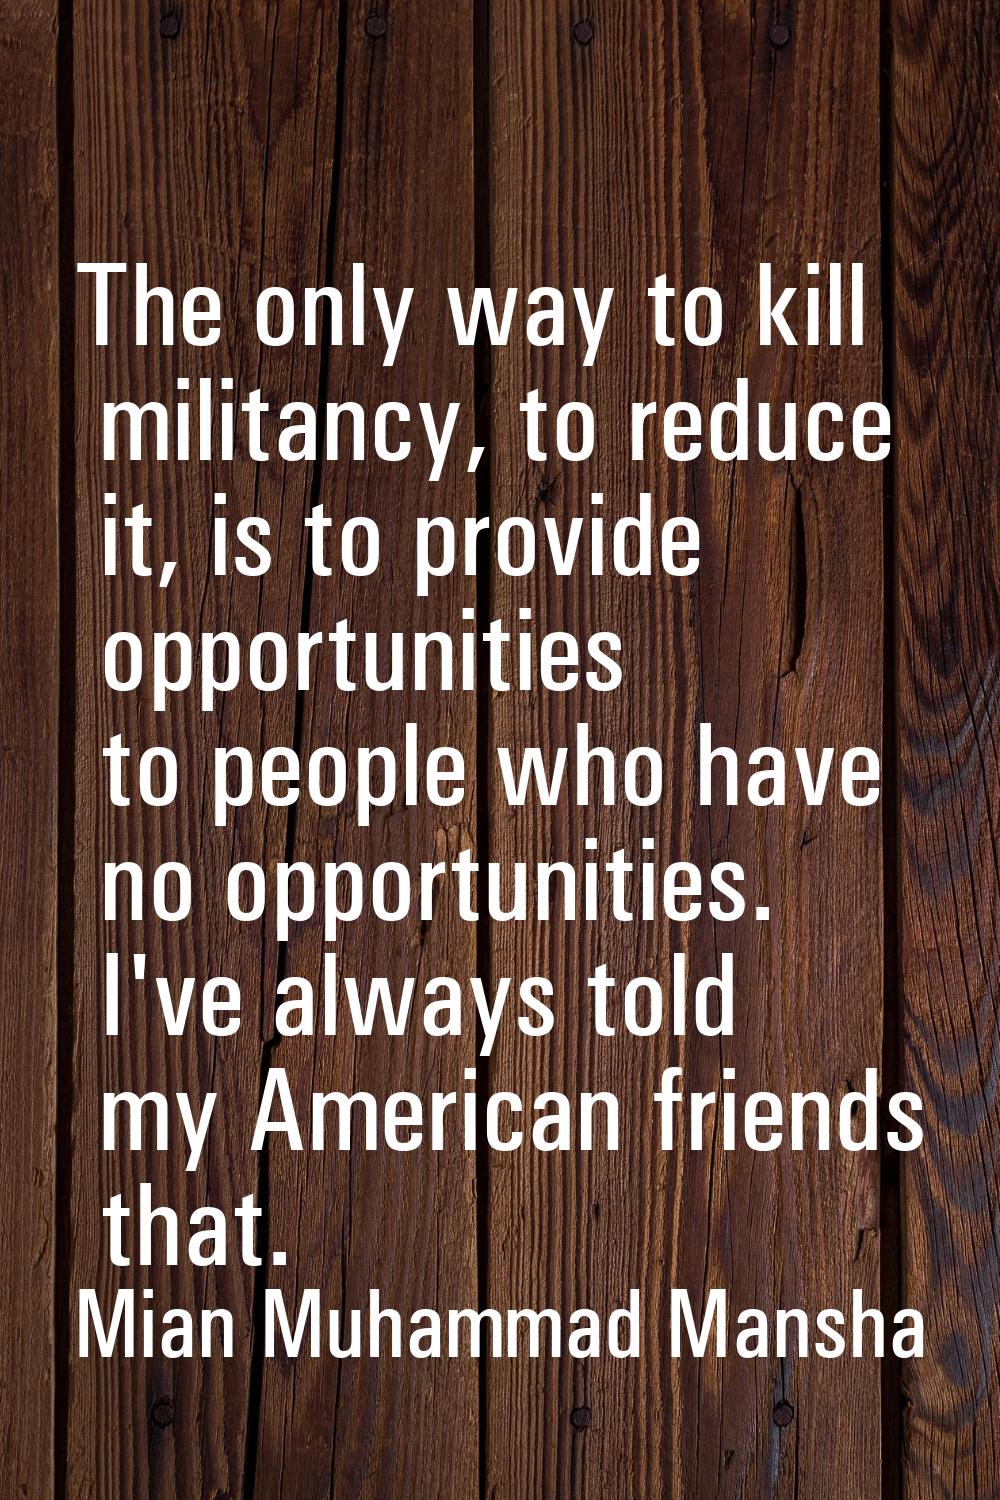 The only way to kill militancy, to reduce it, is to provide opportunities to people who have no opp